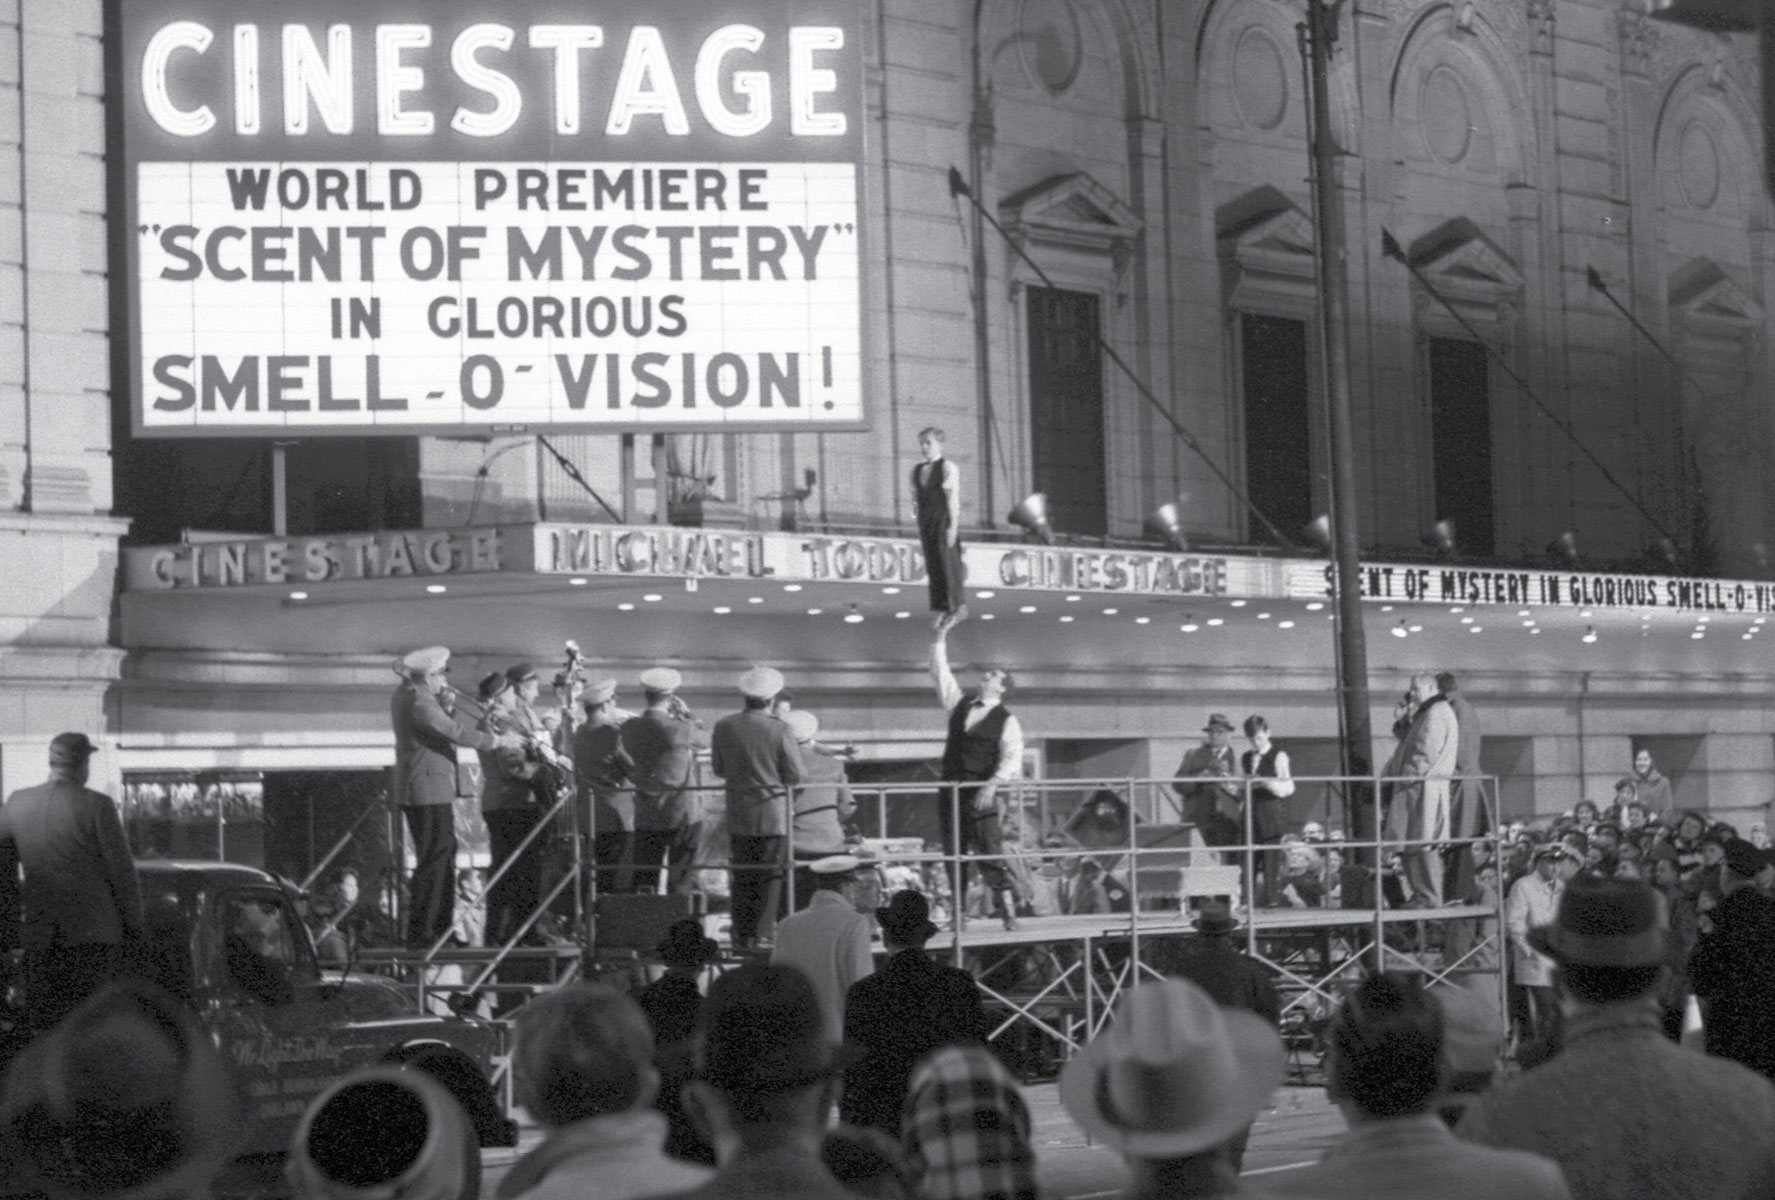 Smell-O-Vision makes its debut at Chicago’s Cinestage on 6 January 1960. Photo Art Shay.